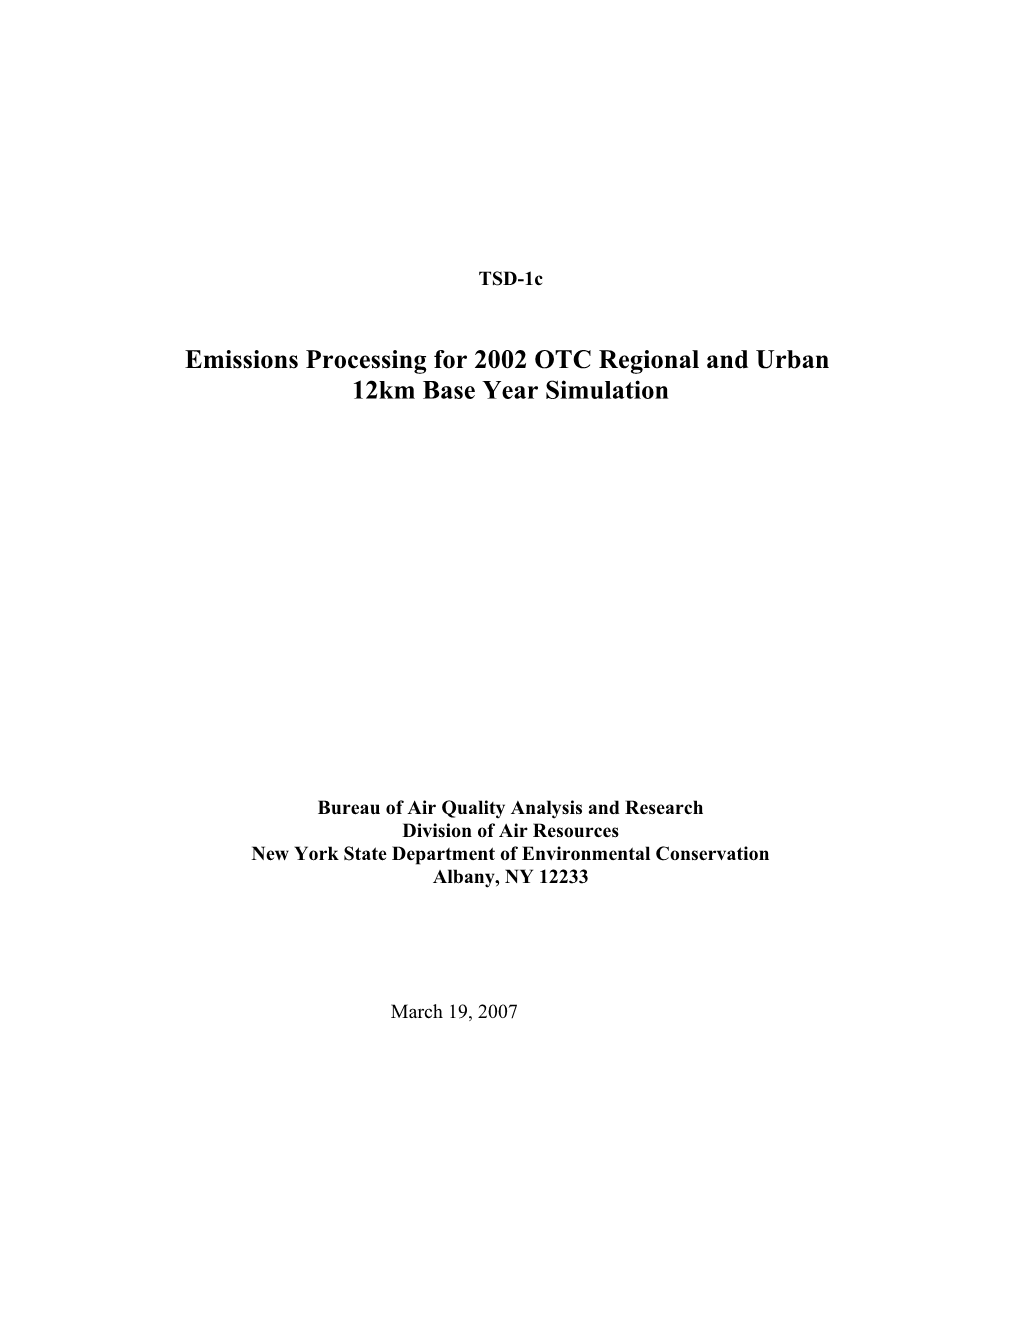 Summary of Emission Processing for the 2002 OTC 12 Km and 36 Km Base Case Simulations